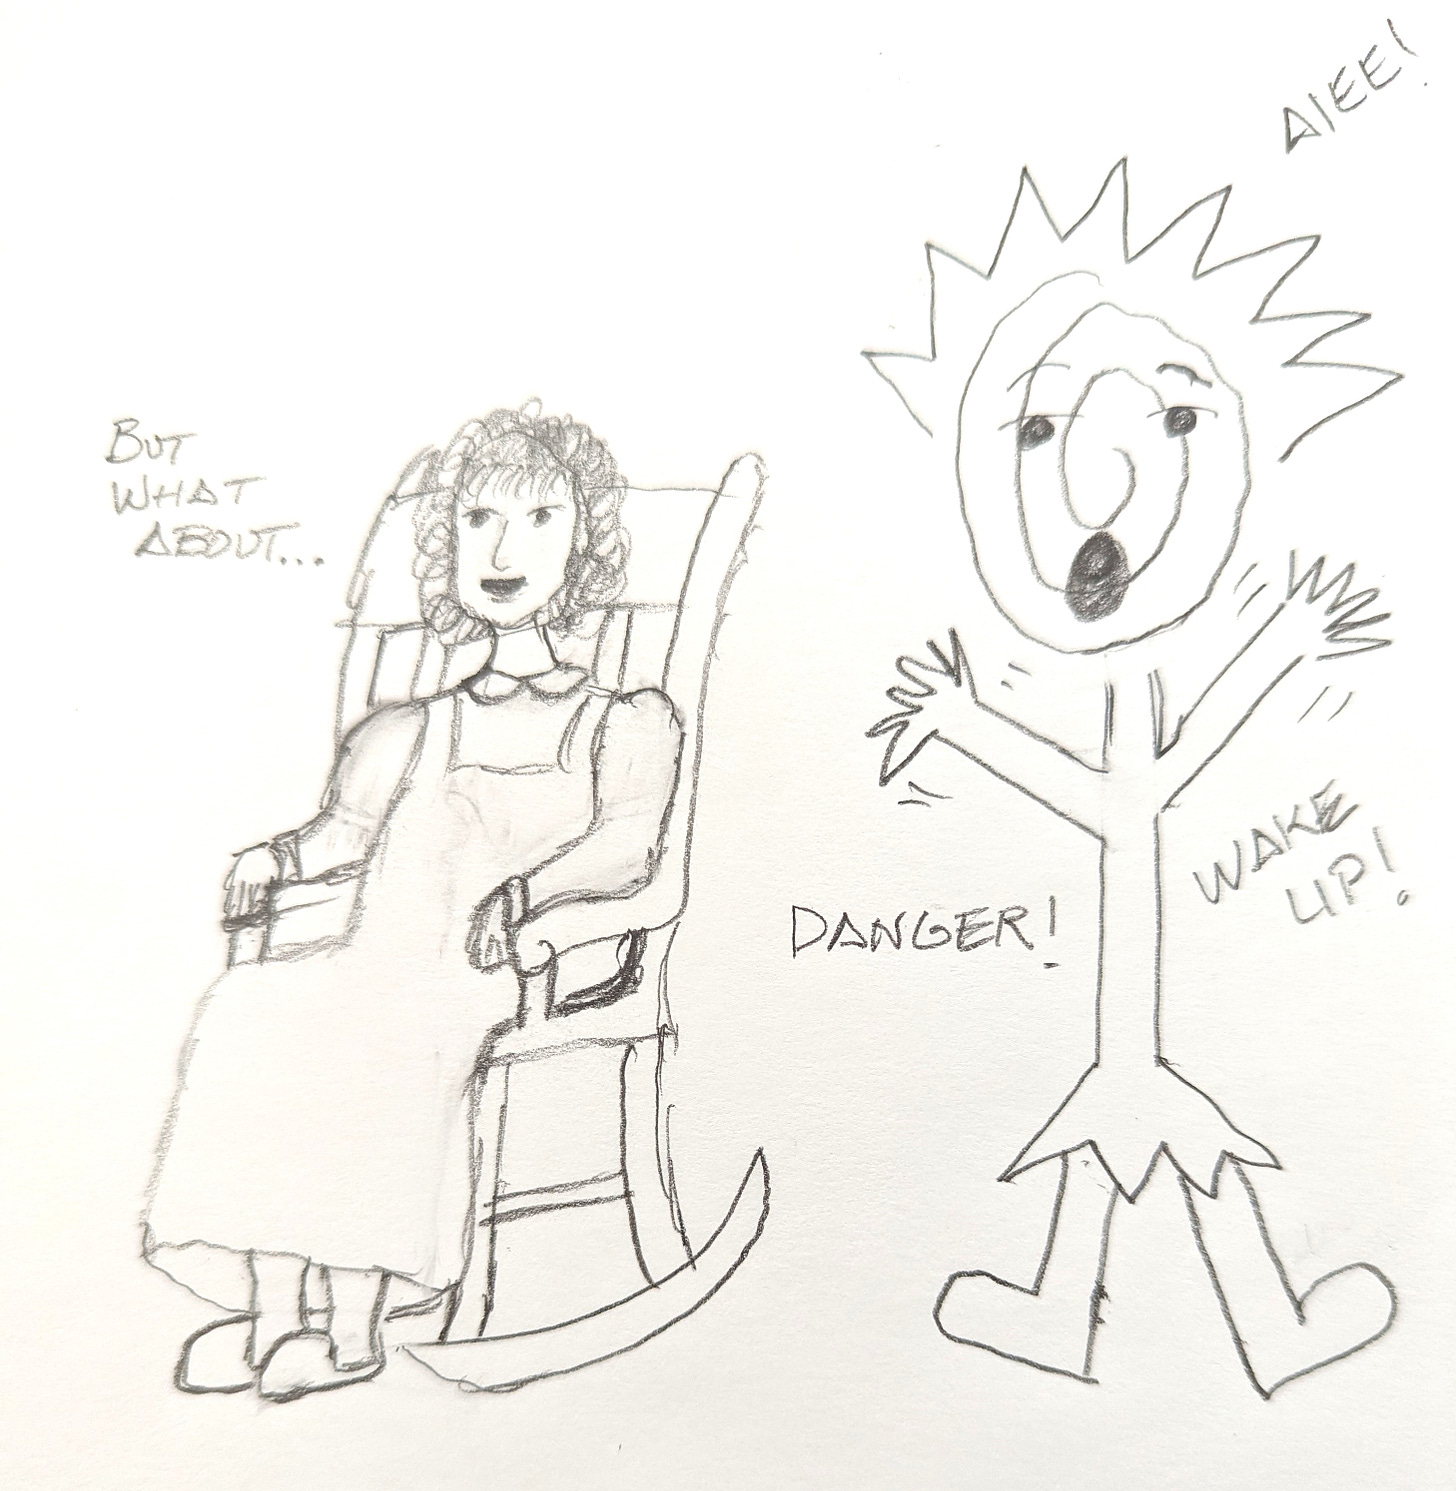 Pencil drawing of woman in rocking chair saying "but what about" and woman jumping with danger and aiee written around her.